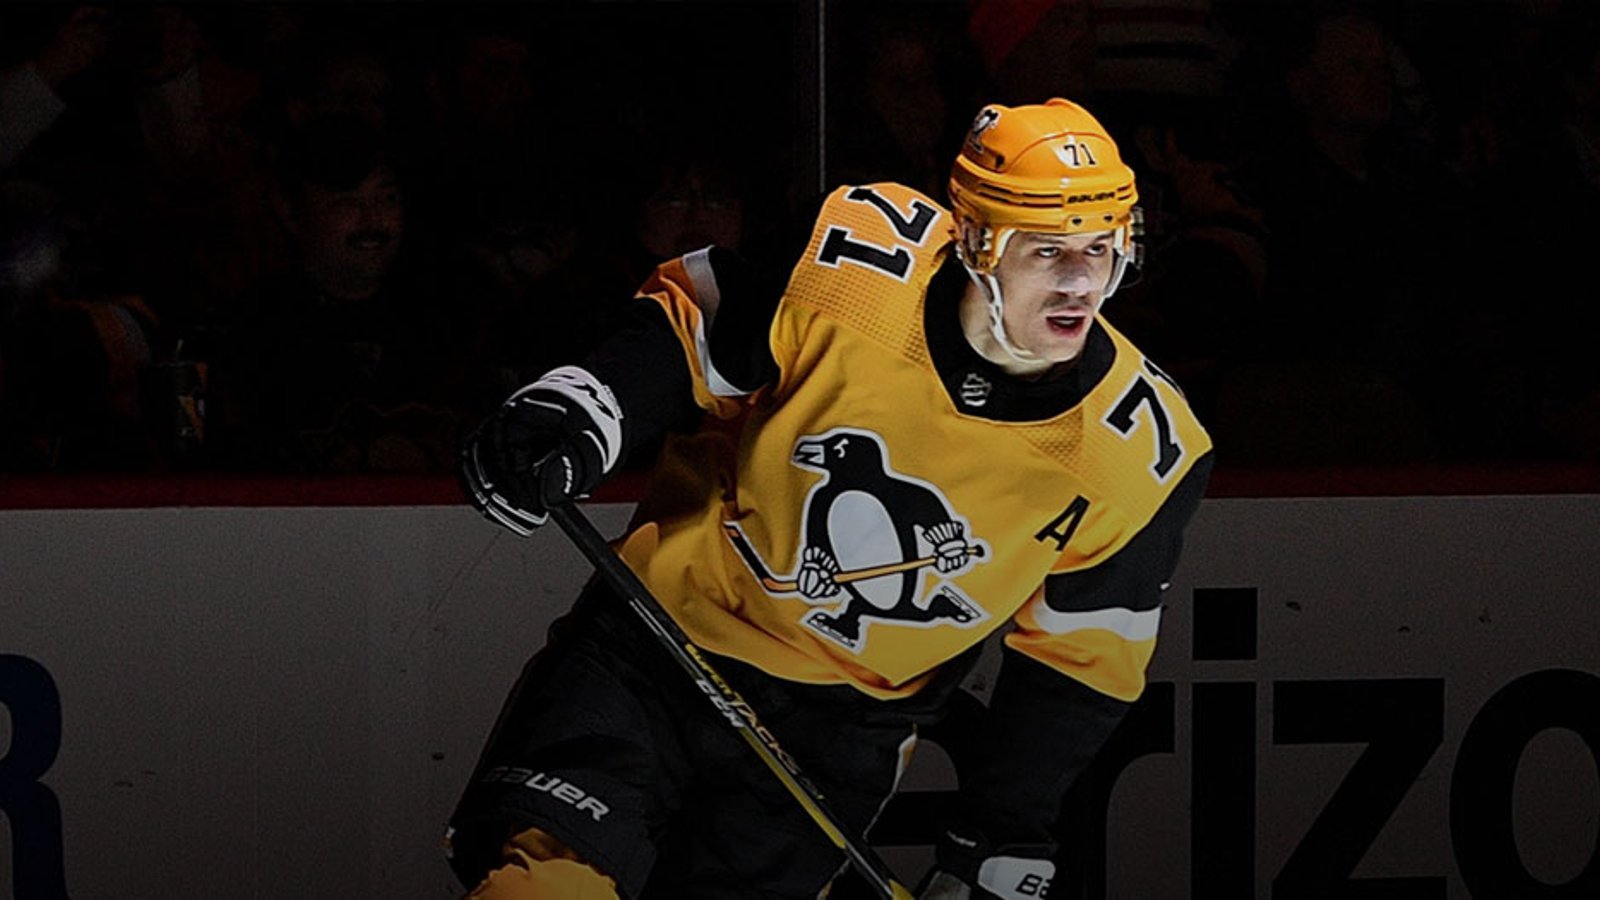 Report: Malkin reportedly demanded trade from Penguins